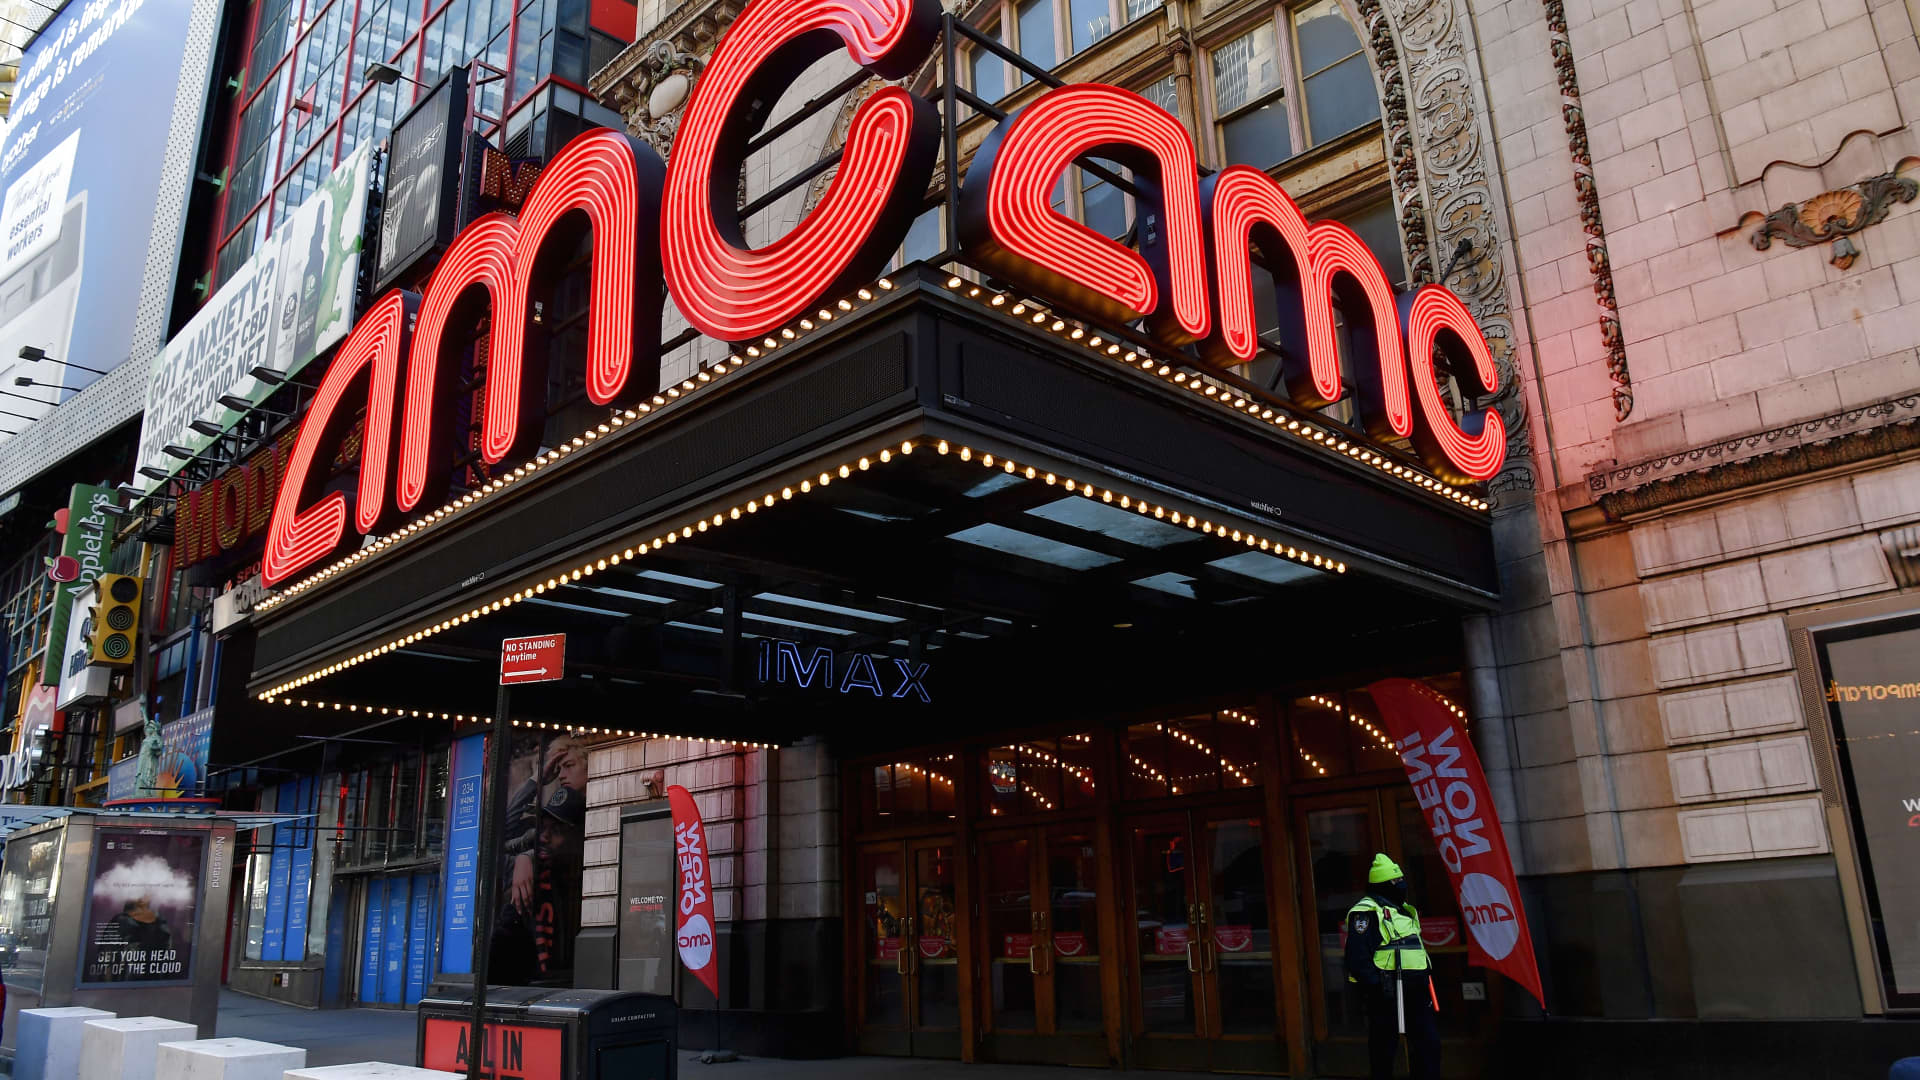 The AMC Empire 25 off Times Square is open as New York City's cinemas reopen for the first time in a year following the coronavirus shutdown, on March 5, 2021.